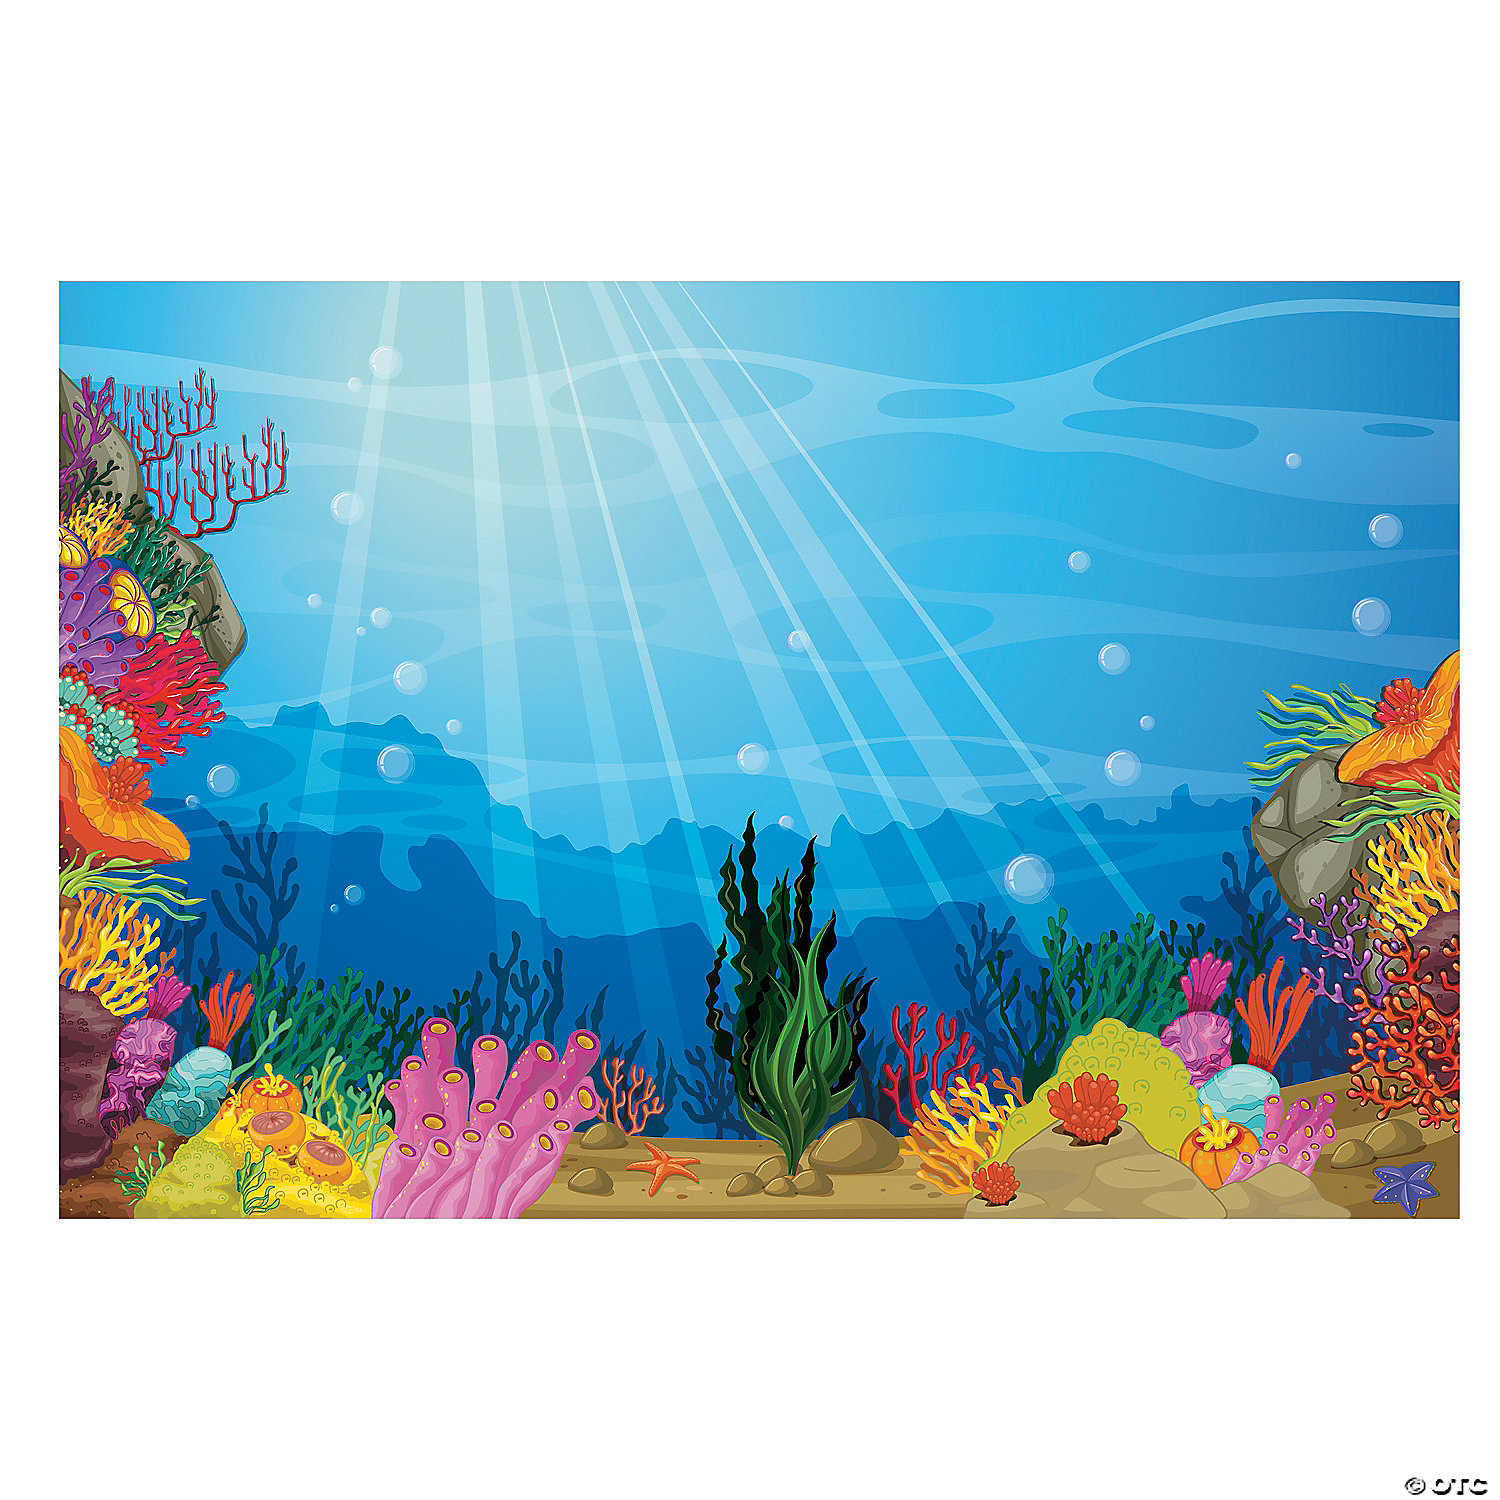 Under the Sea Birthday Party Supplies Party Supplies Canada - Open